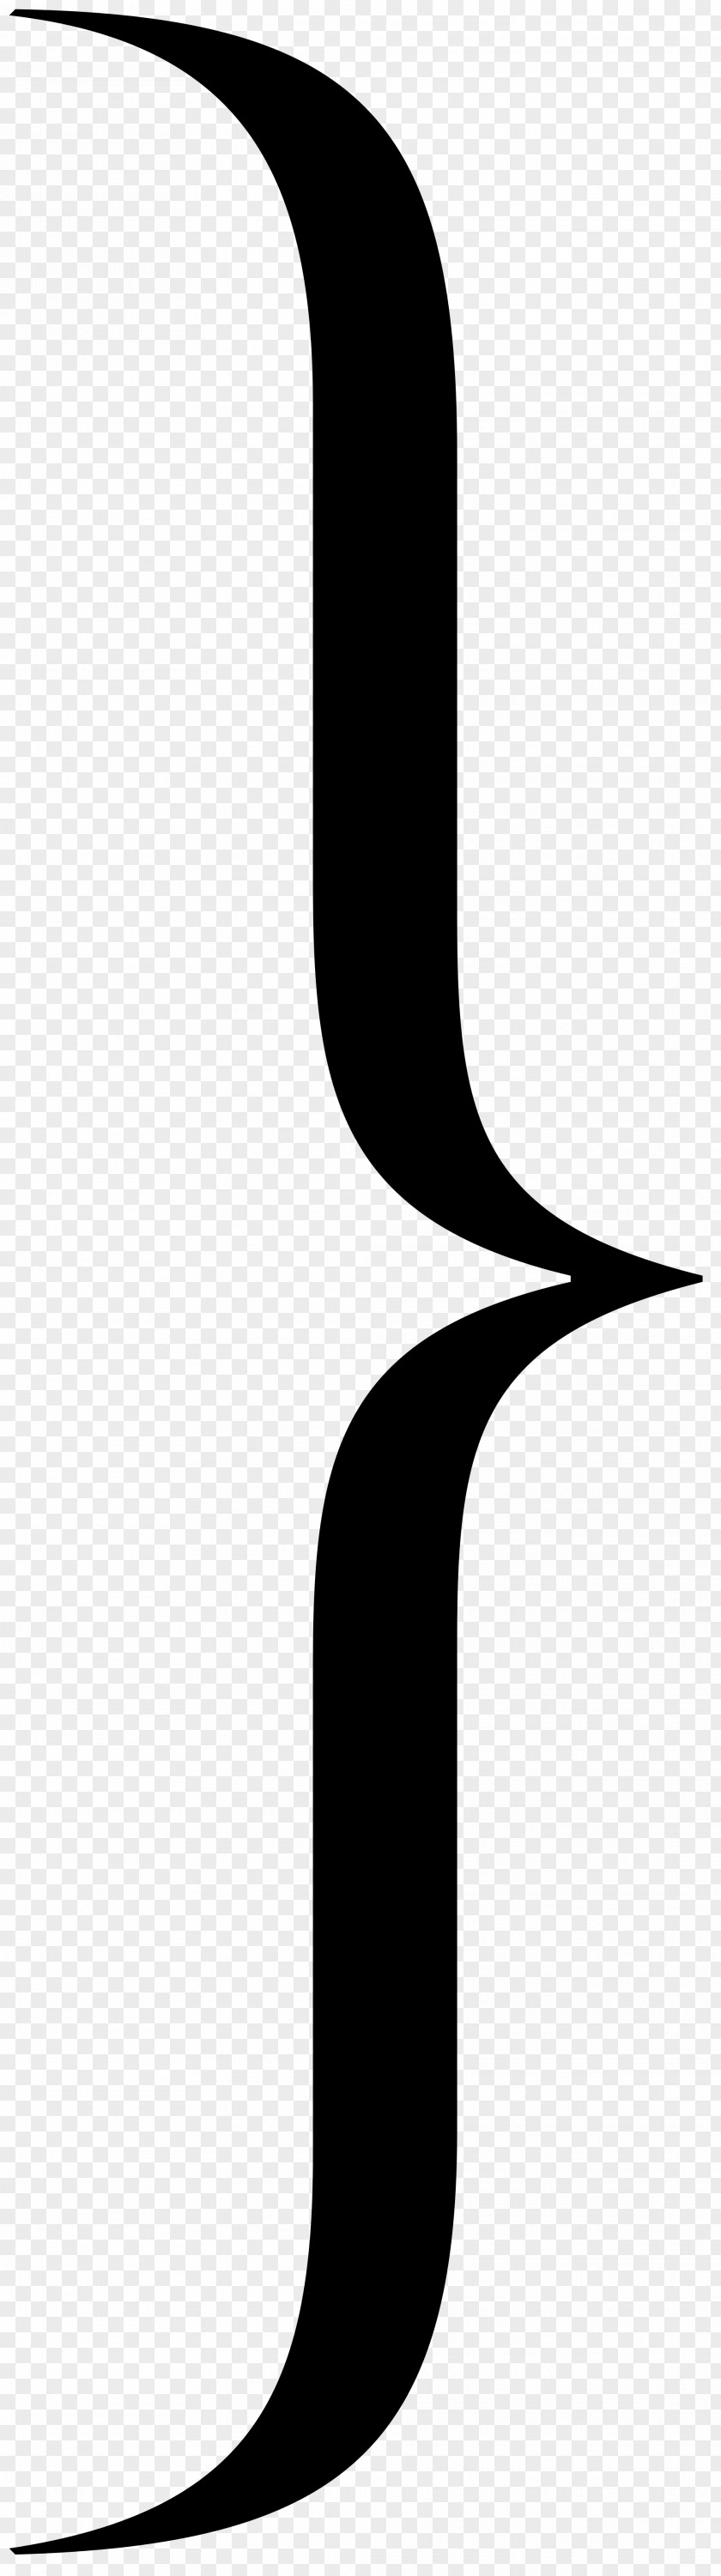 Bracket Symbol Mimicry In Butterflies Parenthesis PNG